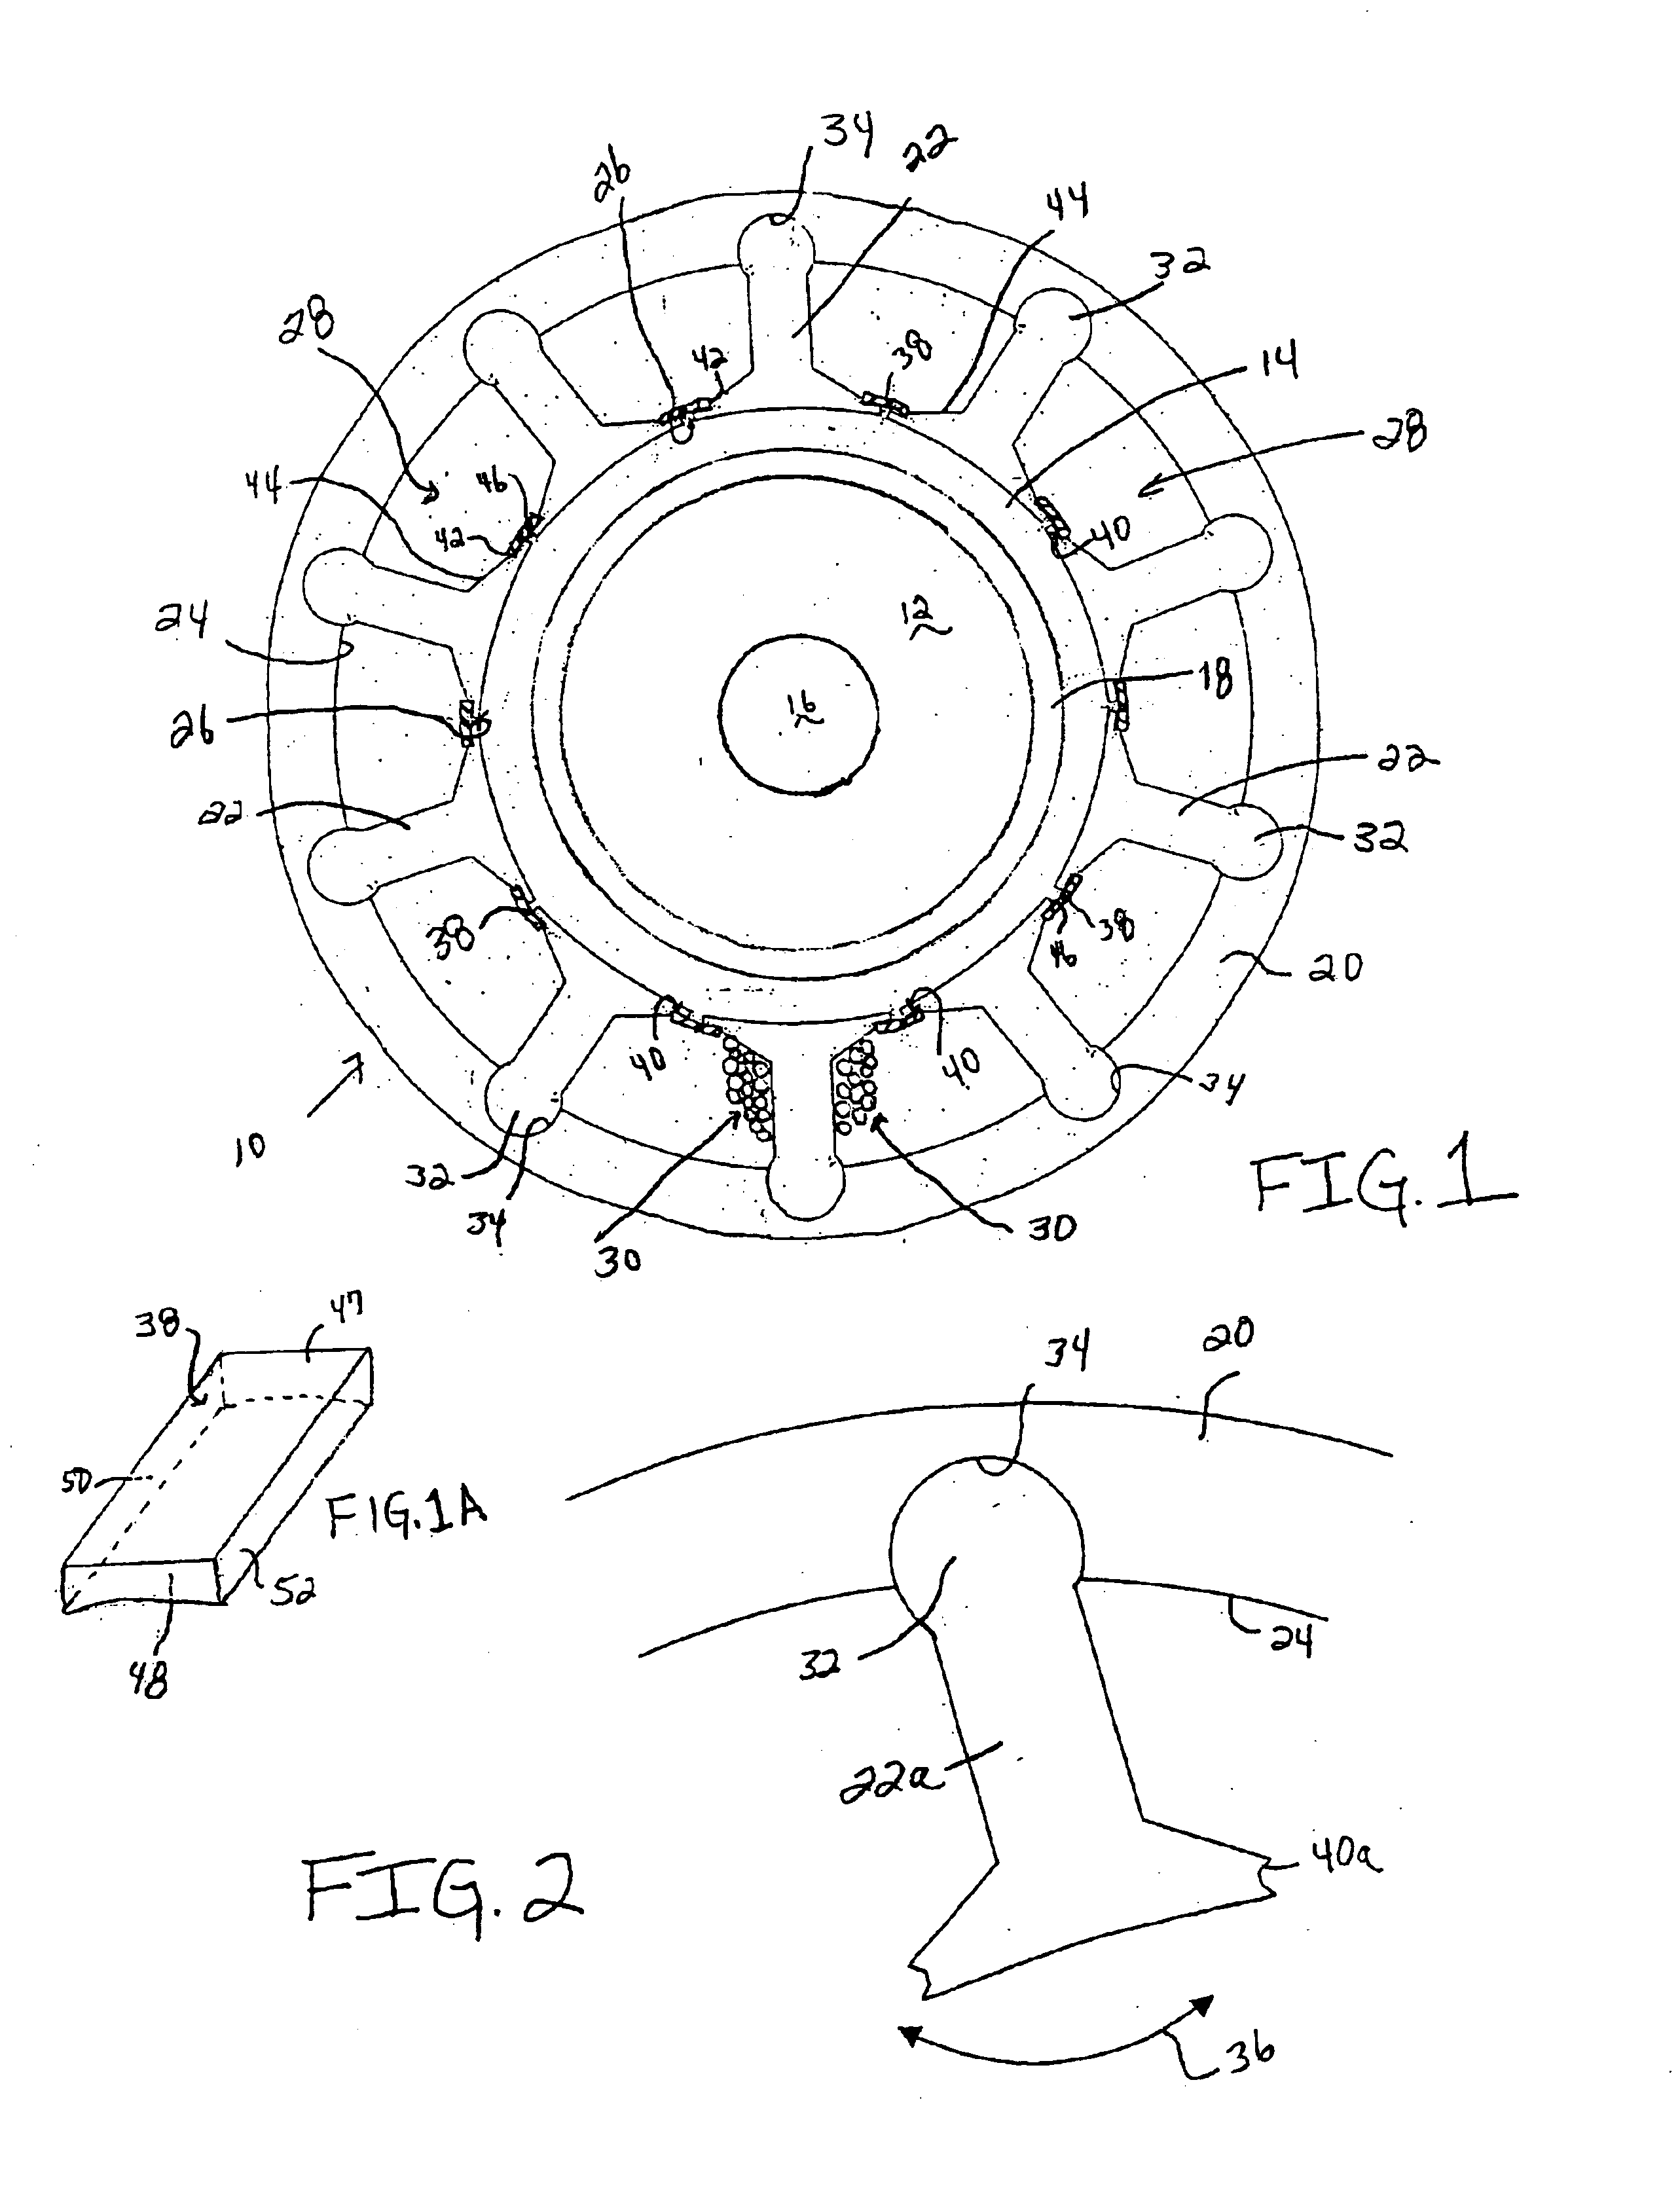 Stator design for permanent magnet motor with combination slot wedge and tooth locator